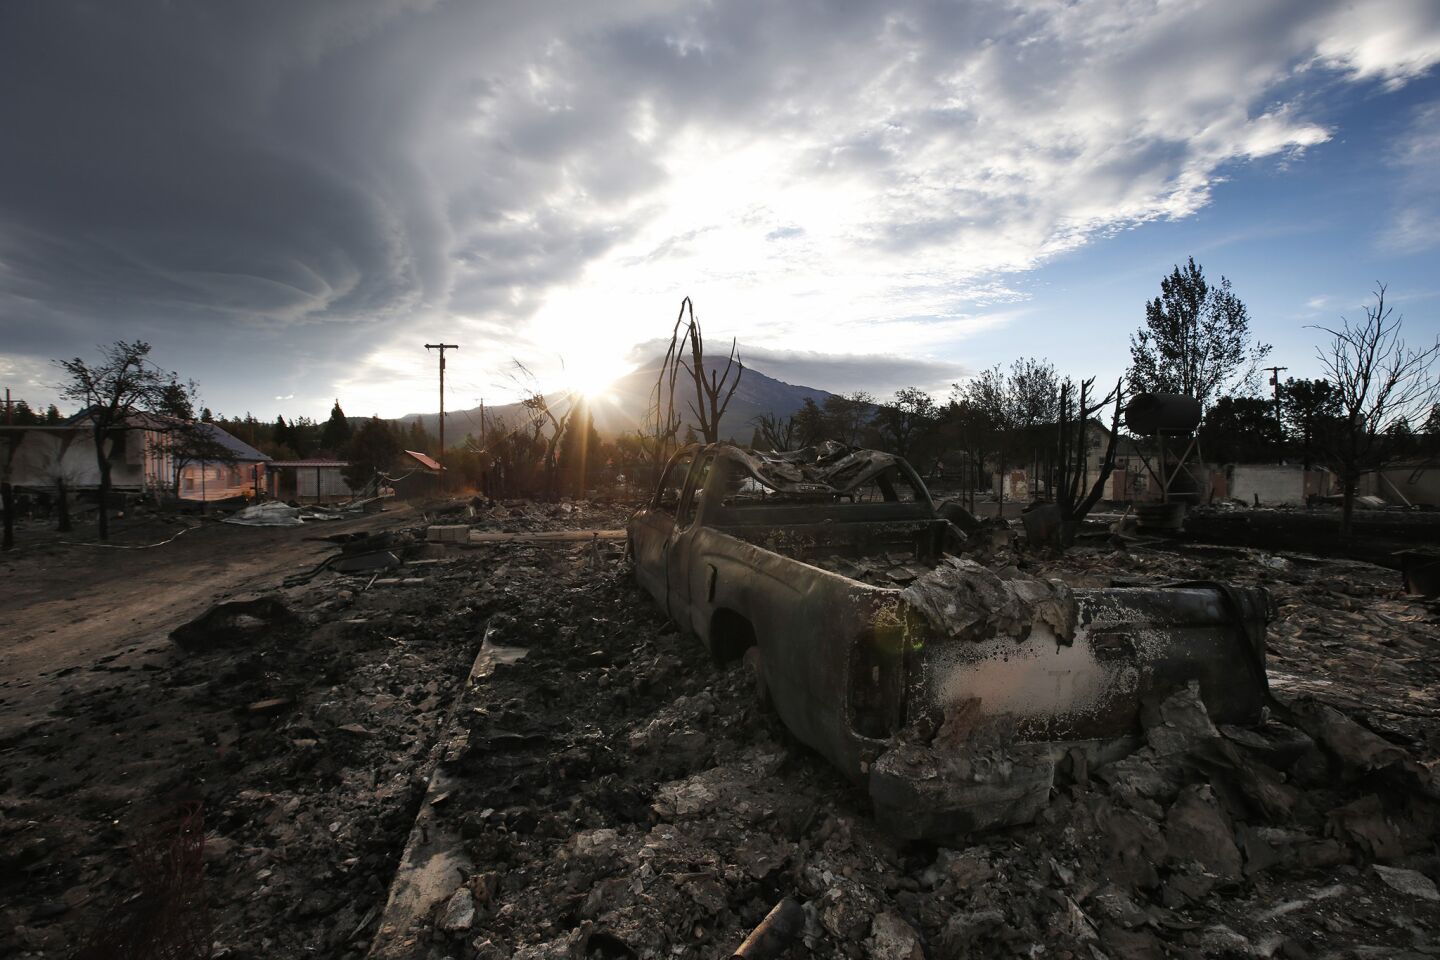 The sun rises behind Mt. Shasta overlooking the devastated Angel Valley neighborhood two days after the Boles Fire, pushed by heavy winds devastated this town near the California and Oregon border.